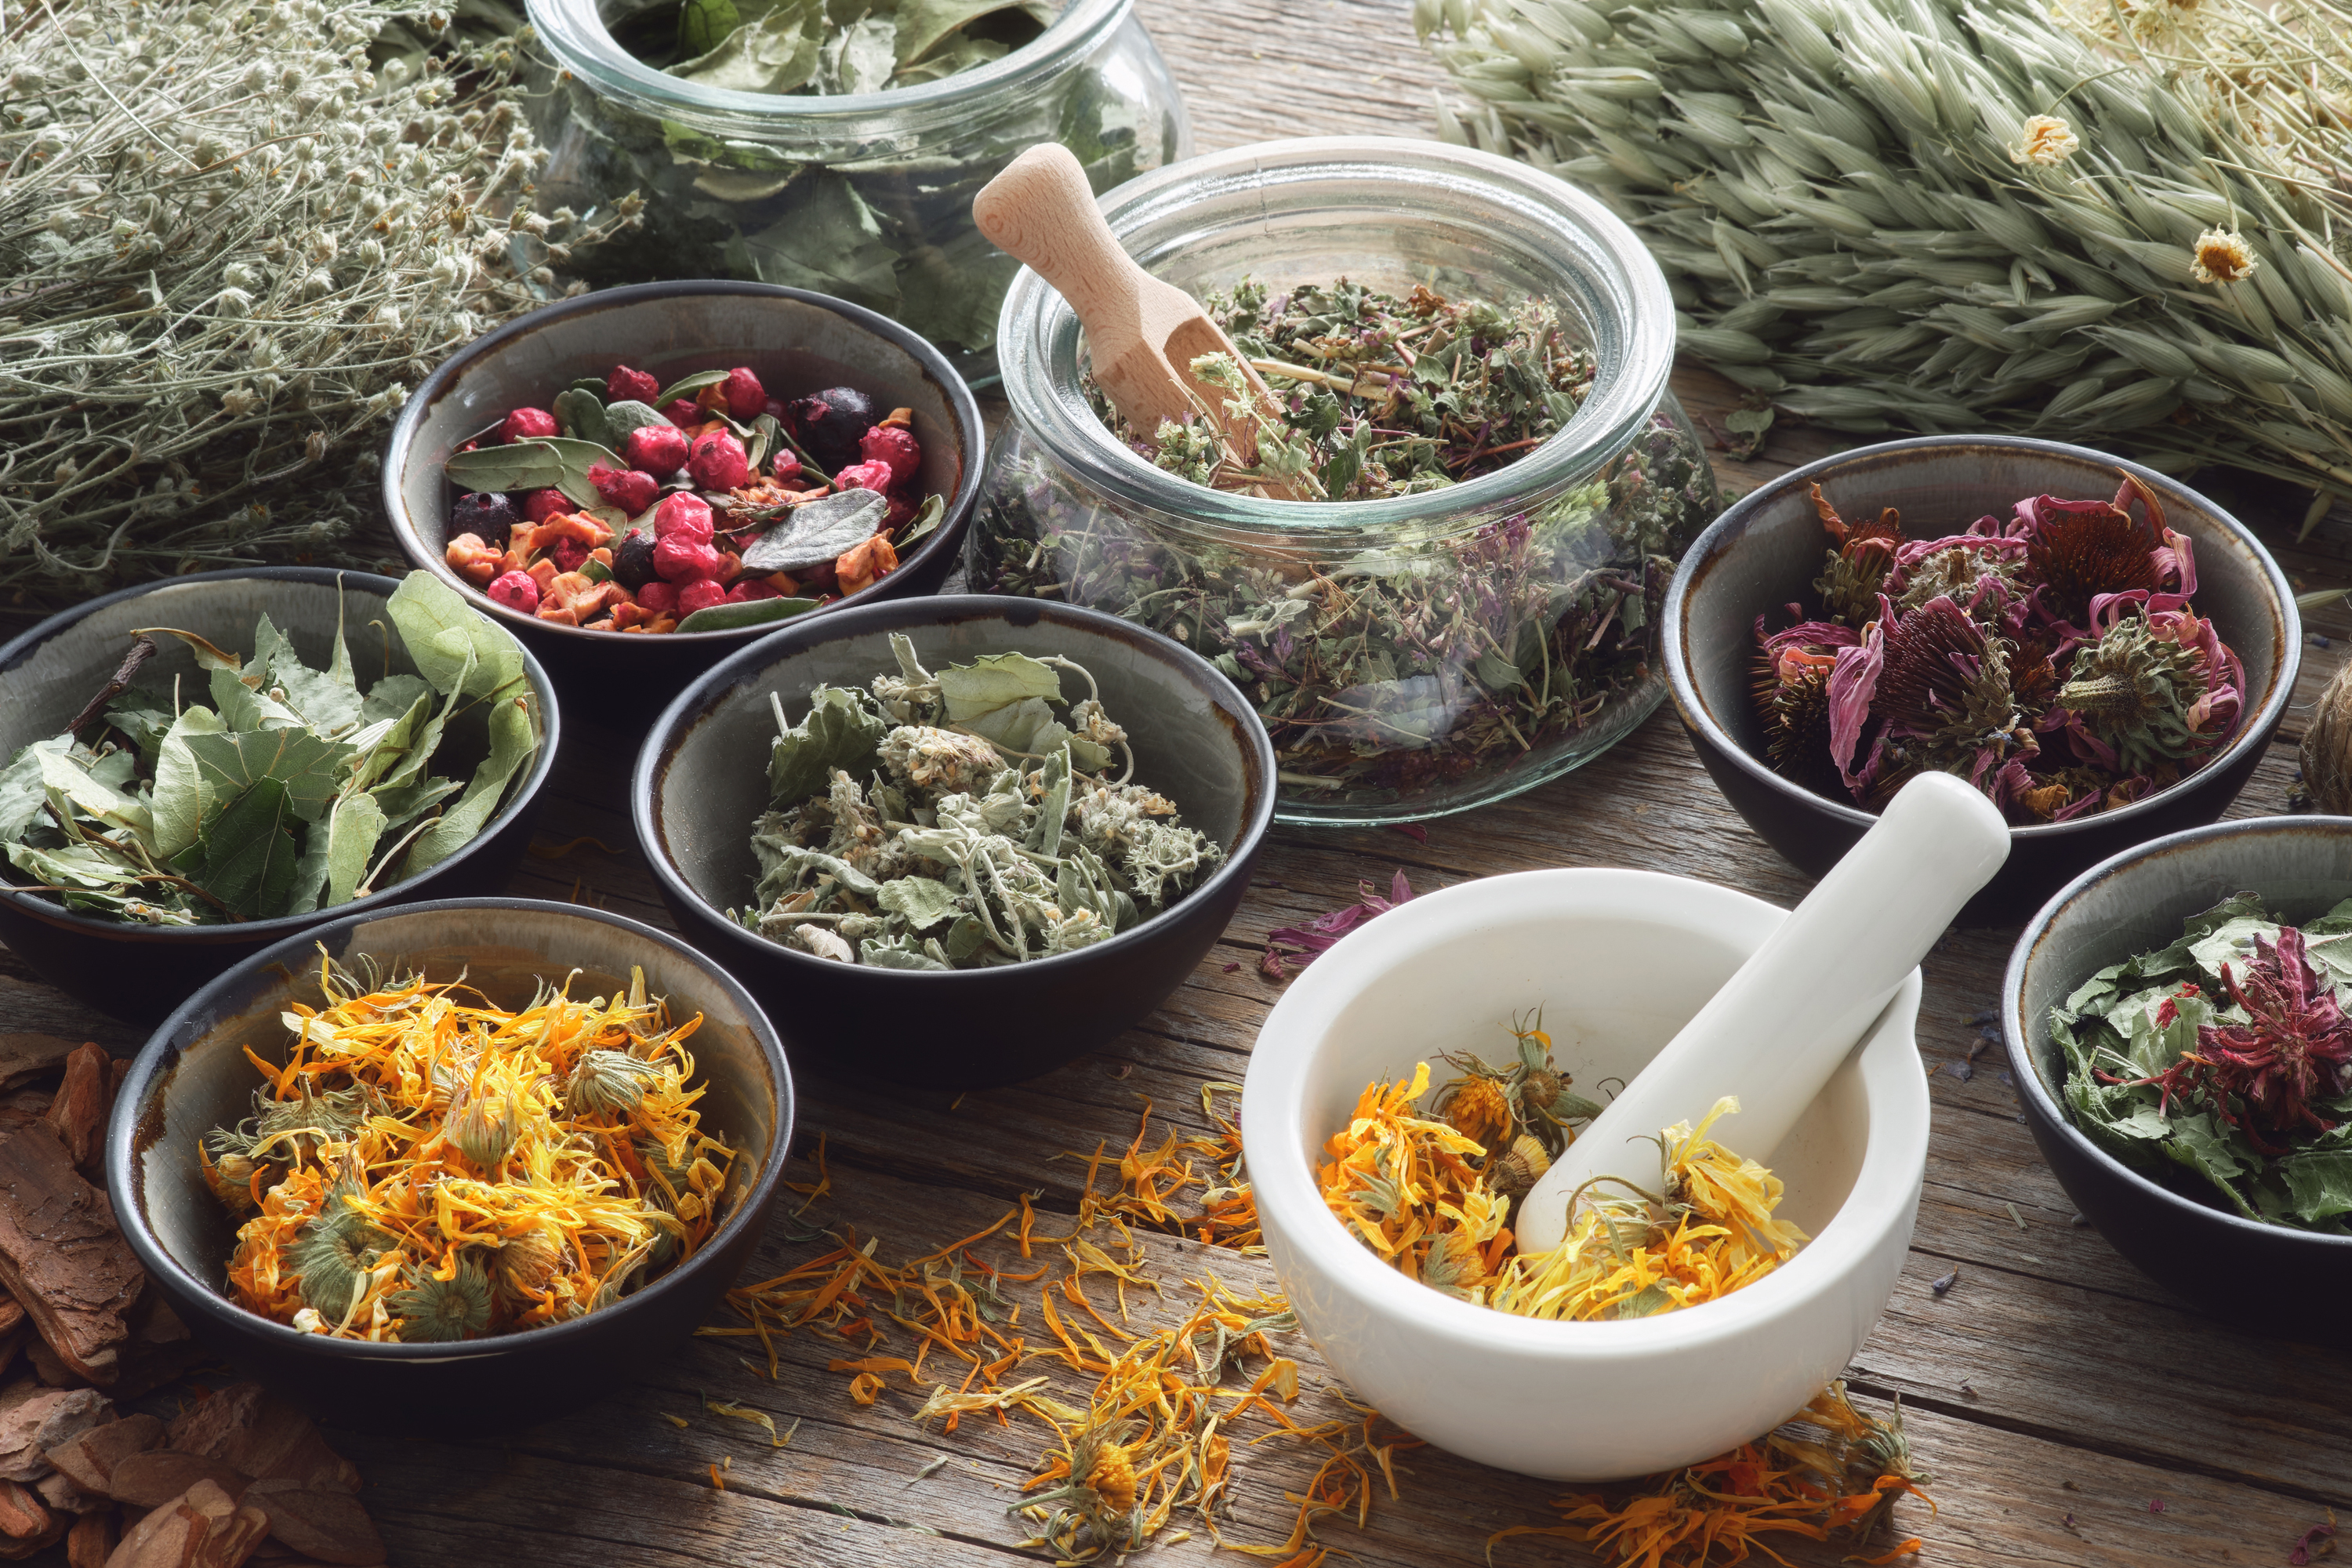 Herbal treatments for cancer prevention